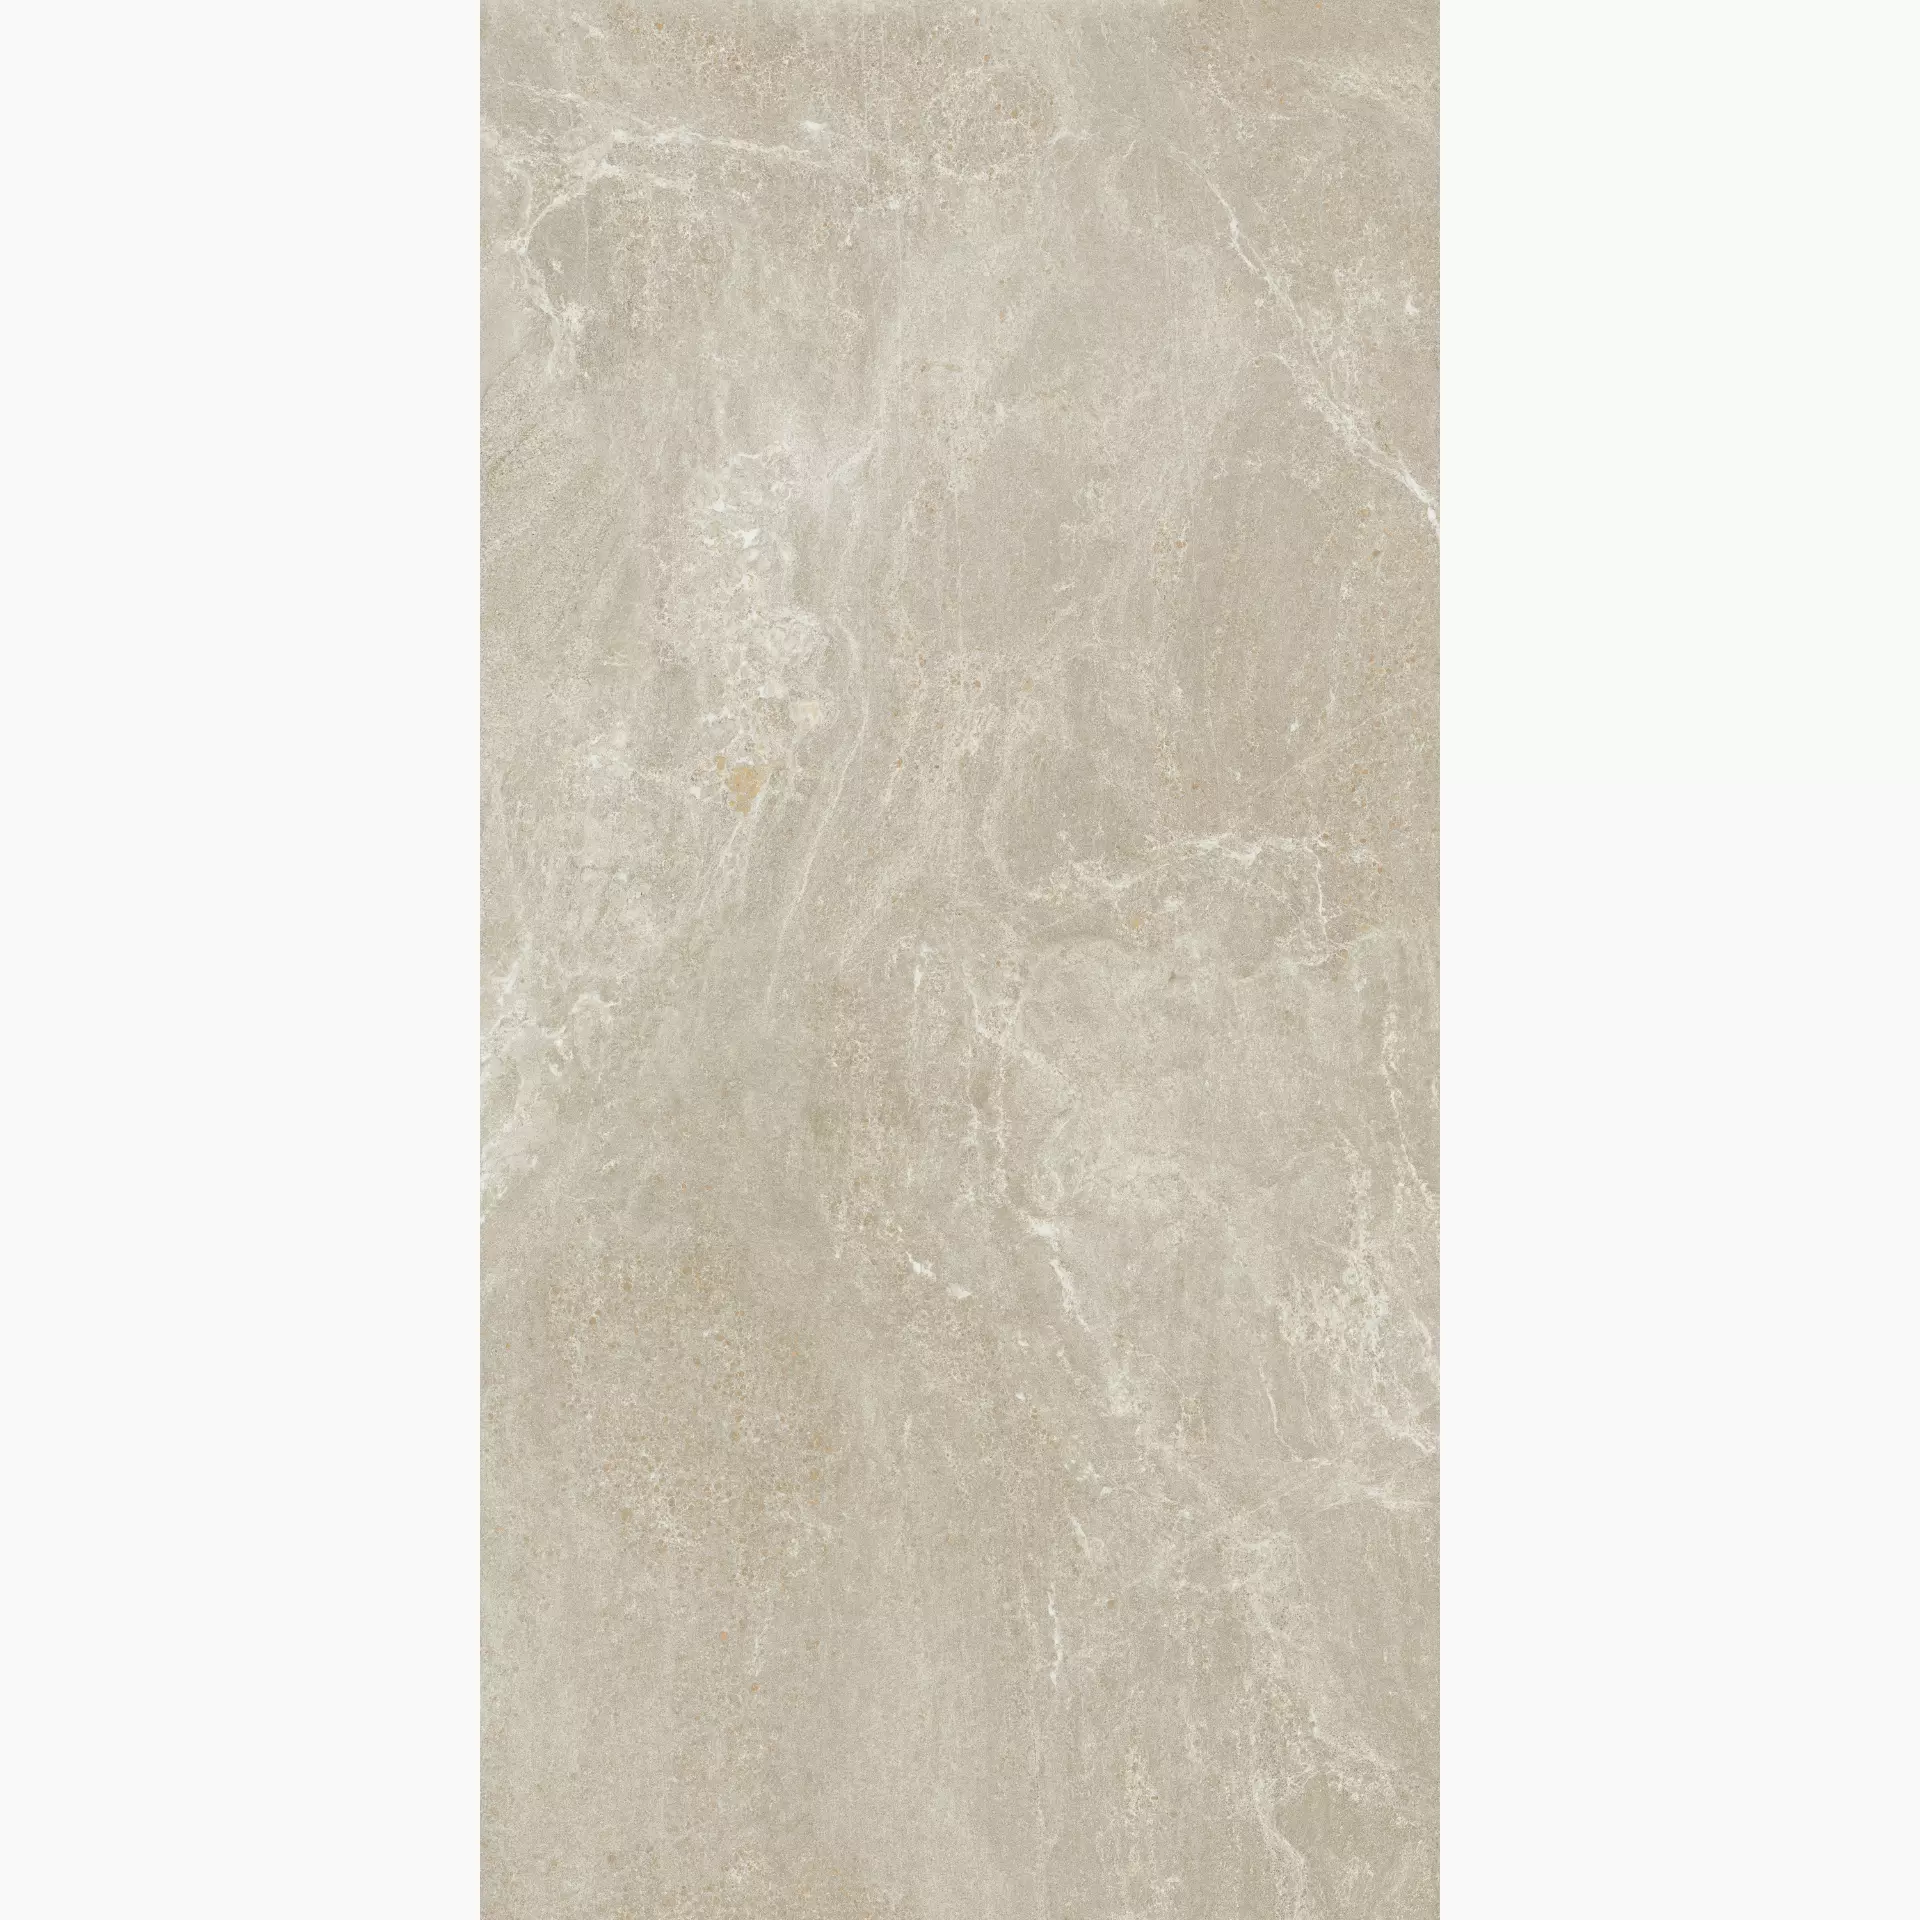 Panaria The Place County Beige Antibacterial - Naturale PGXP910 60x120cm rectified 9mm